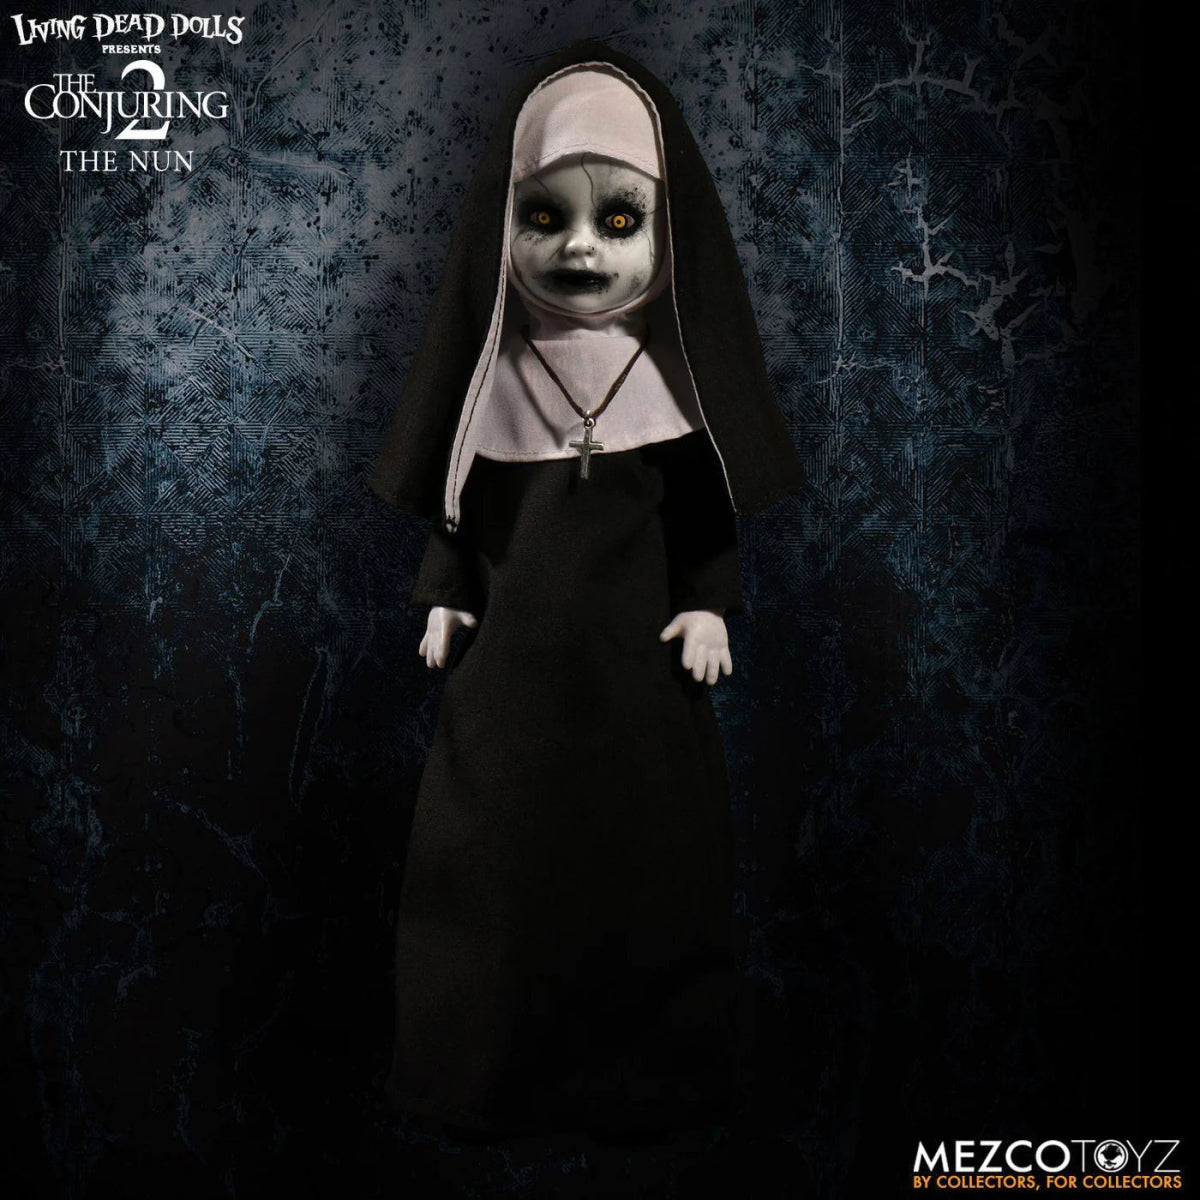 Living Dead Dolls The Conjuring 2 The Nun Doll - Simon's Collectibles